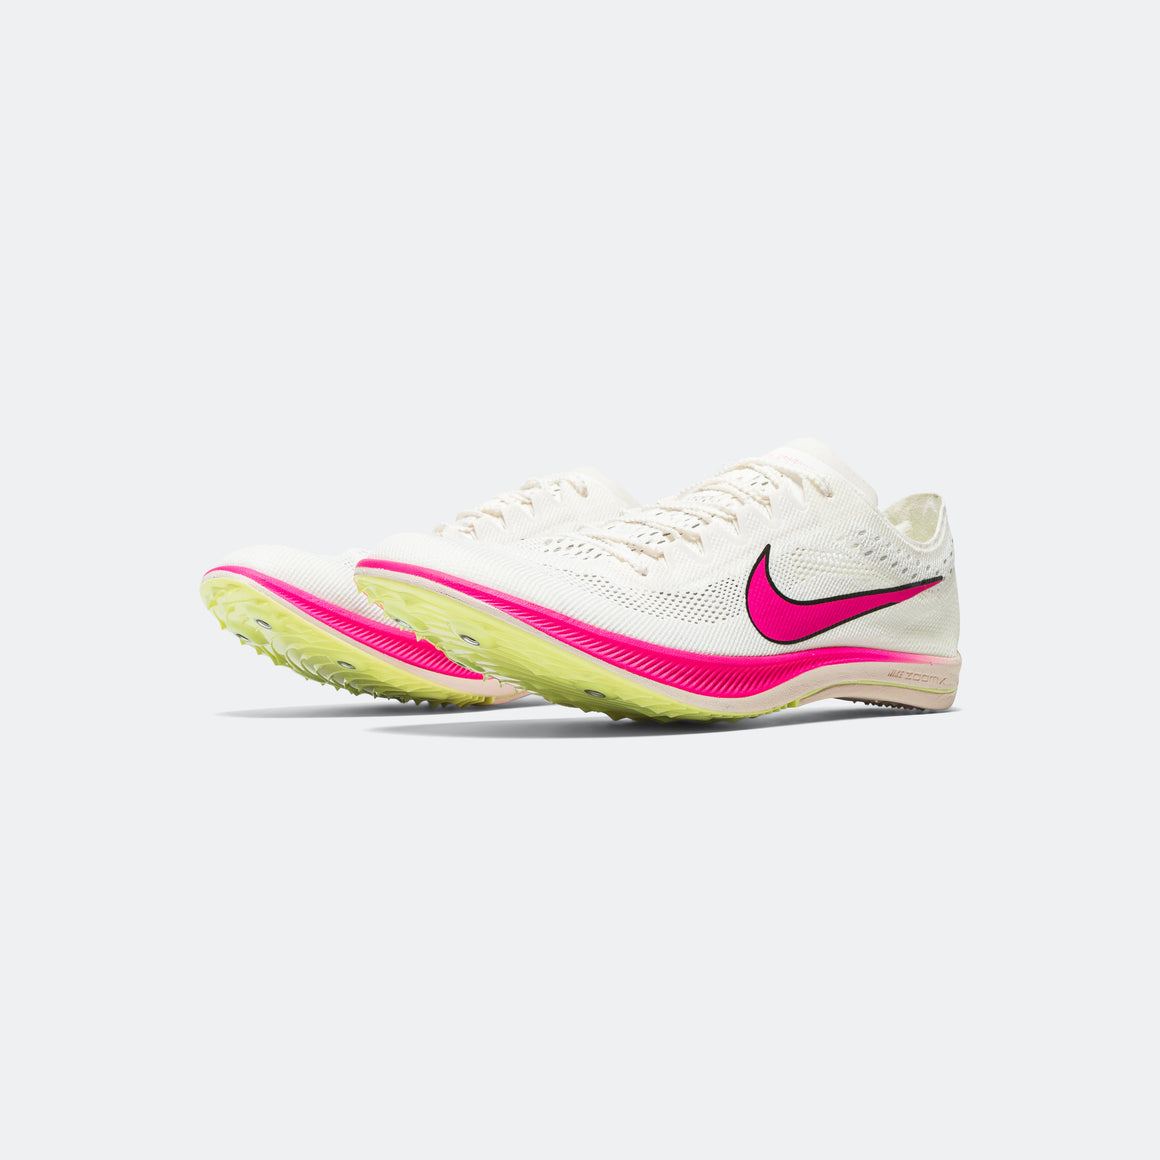 Nike - Mens ZoomX Dragonfly - Sail/Fierce Pink-Lt Lemon Twist - Up There Athletics